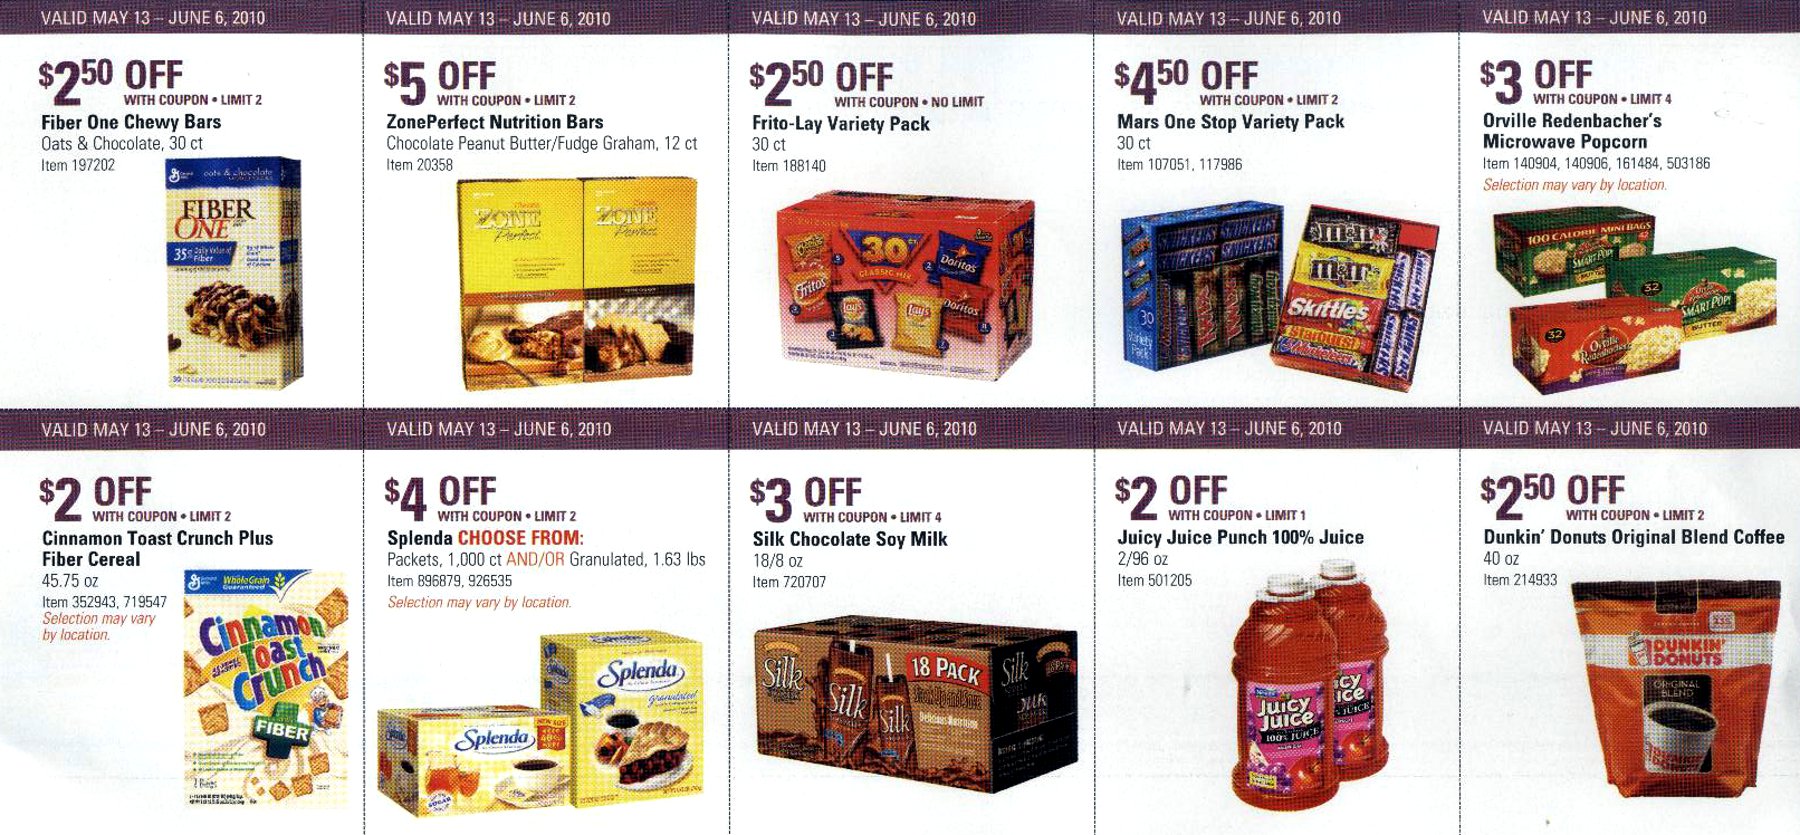 Coupon book full size page ->2<-